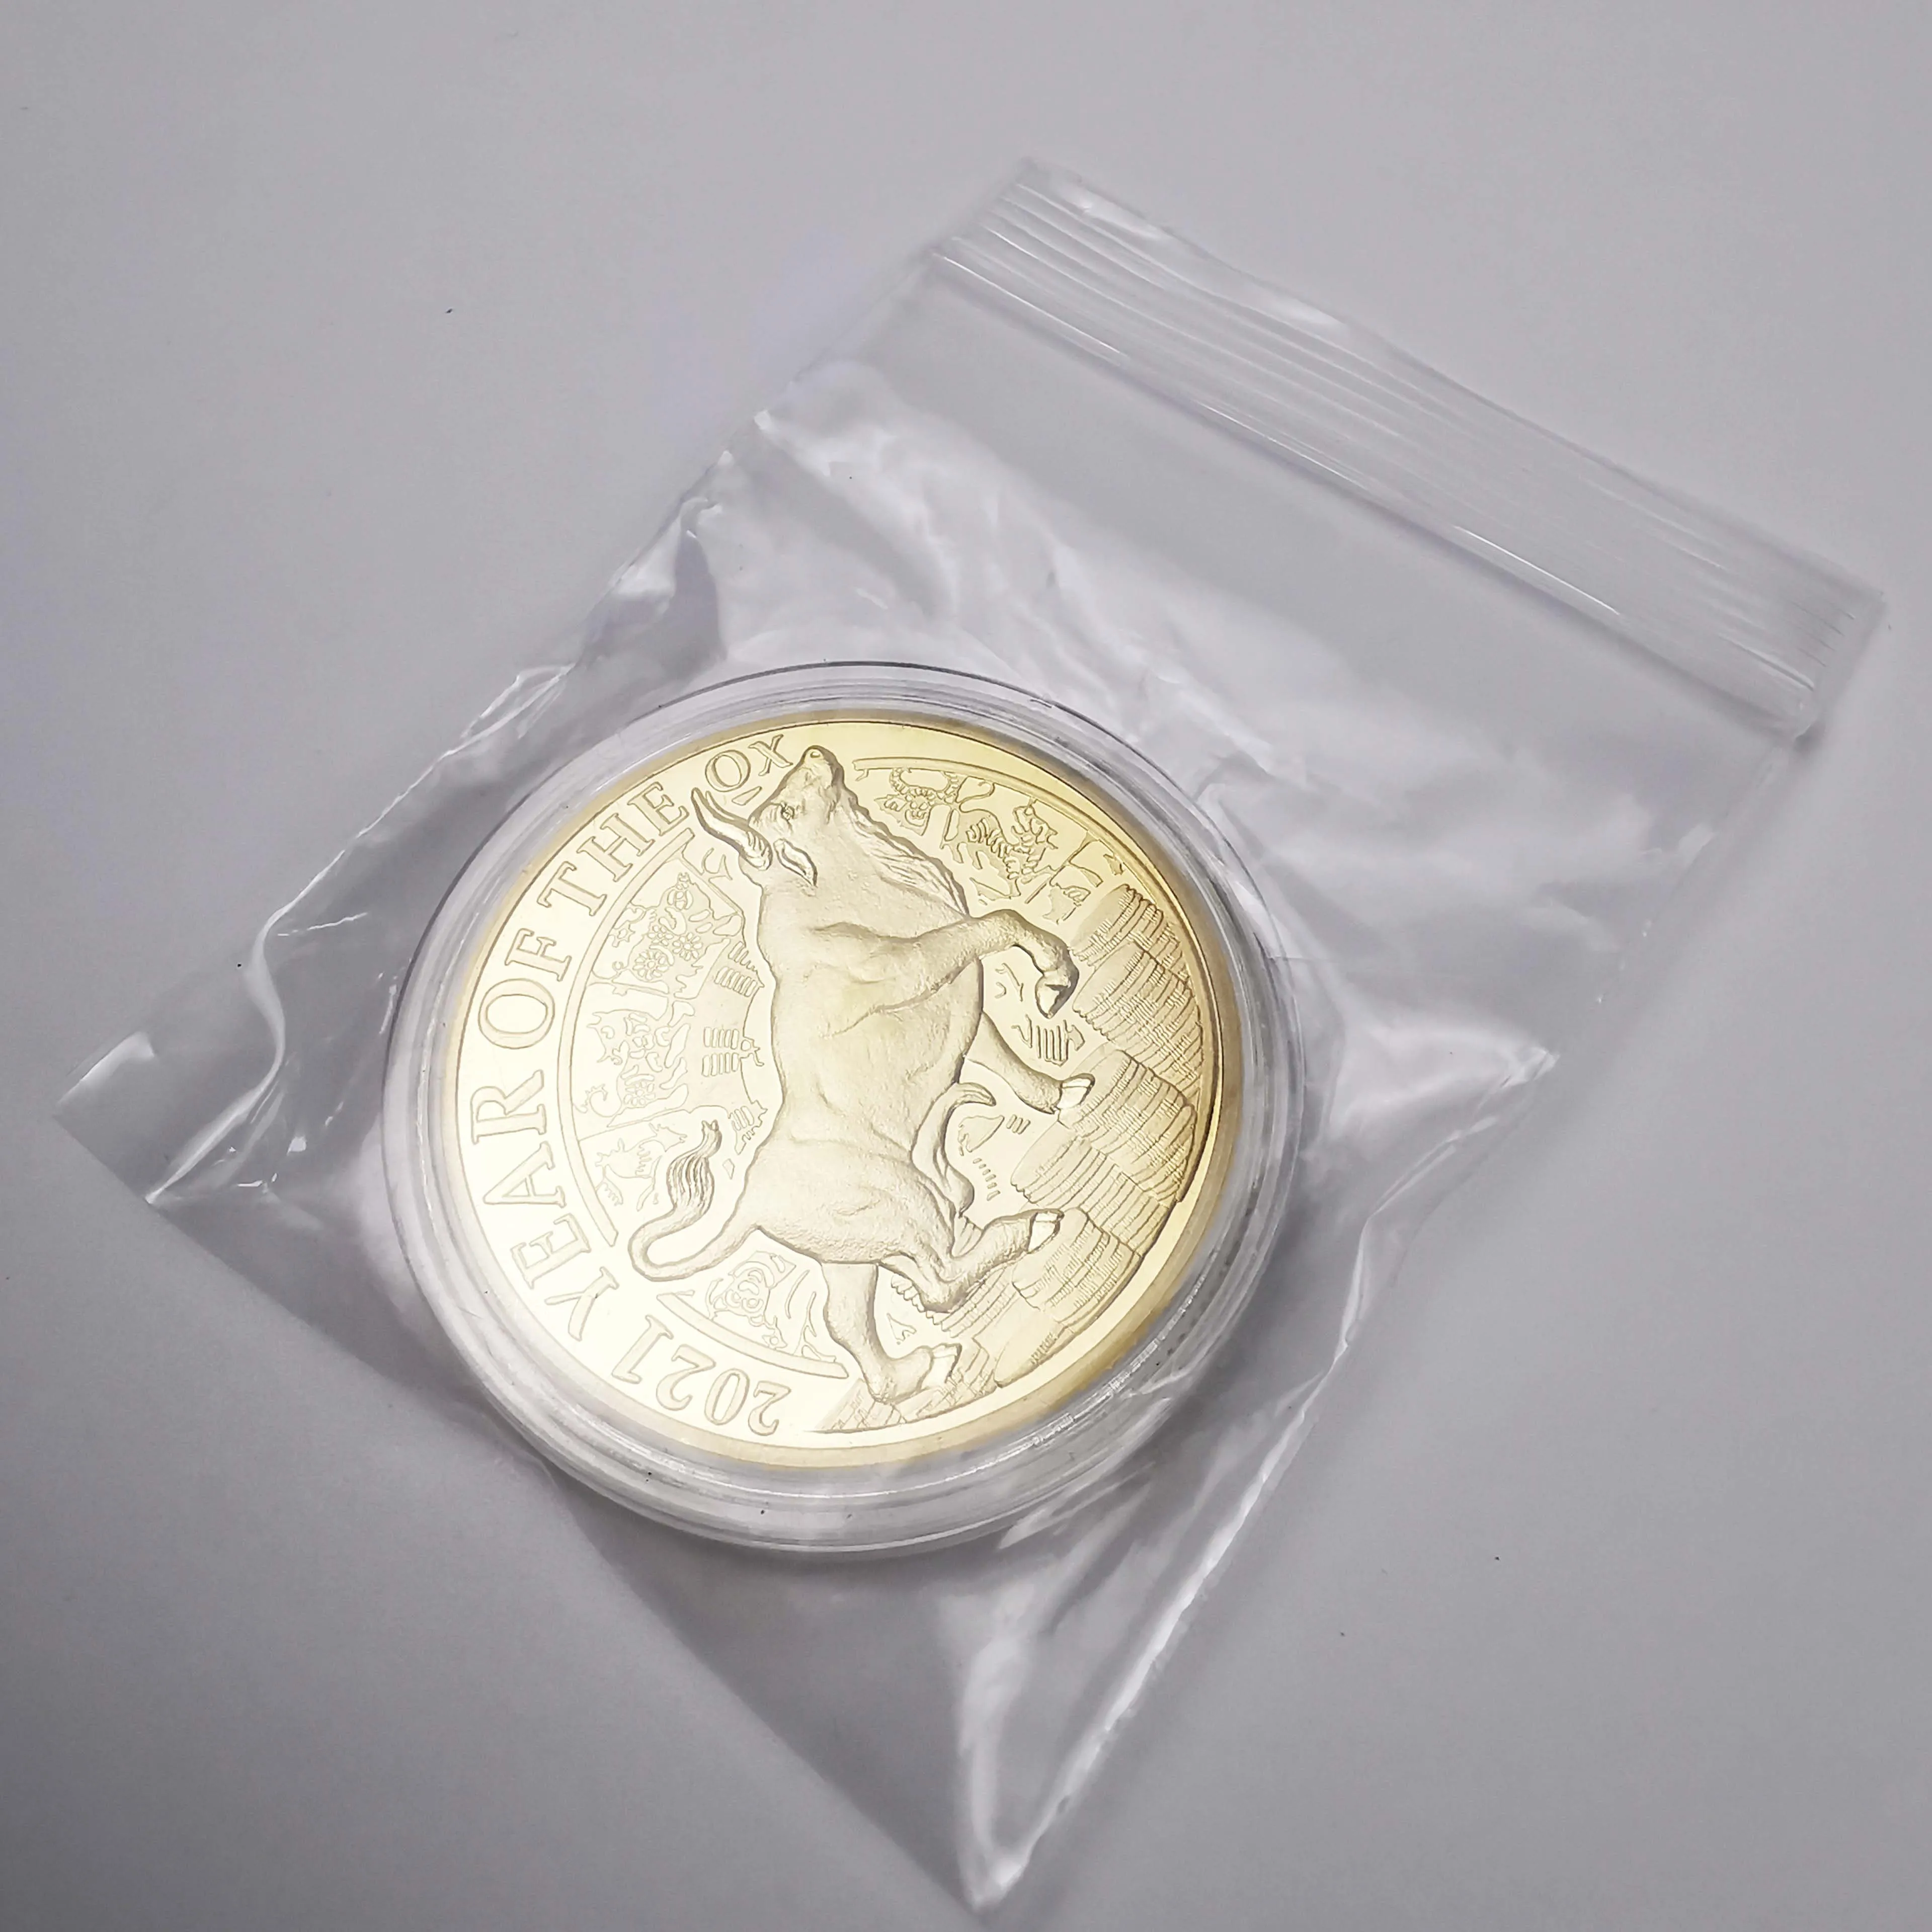 

2021 Year Of The Ox Gold Coin New Year Souvenirs Gifts Lucky Commemorative Coins Medal Bull Symbol Christmas Gift